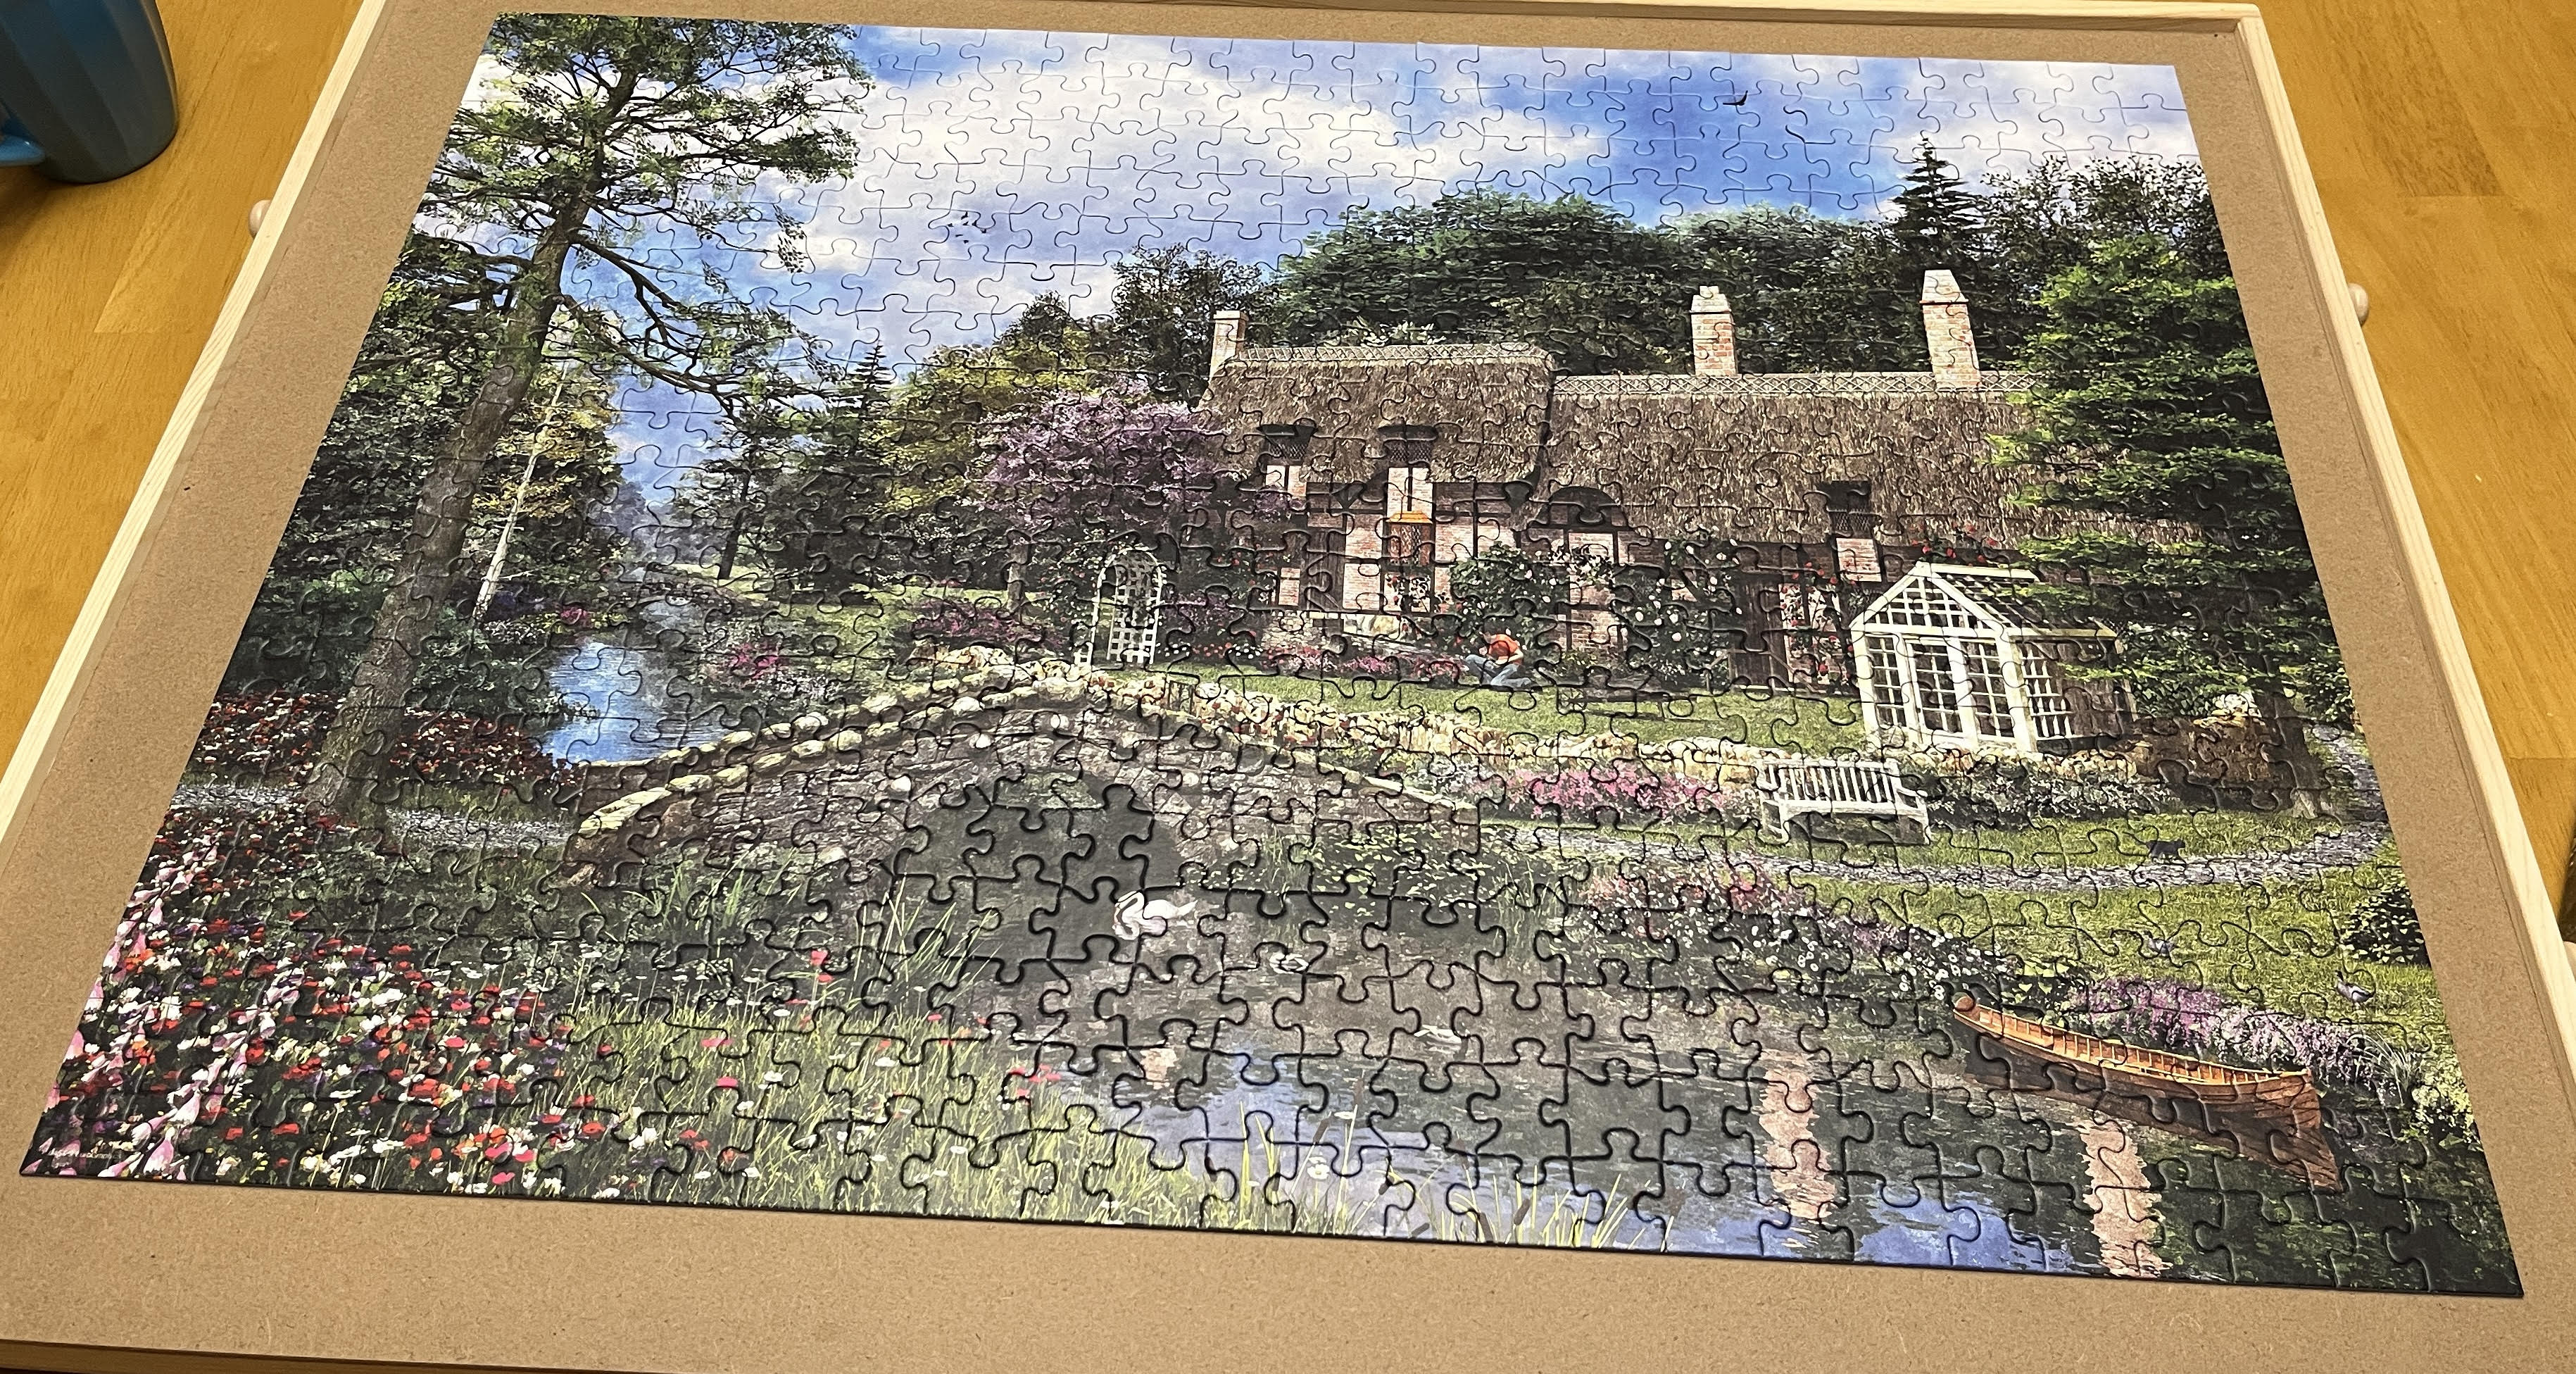 A picture of a completed puzzle on a puzzle board. The puzzle image is of a cottage in the English countryside, surrounded by flowers and a small brook with a bridge.